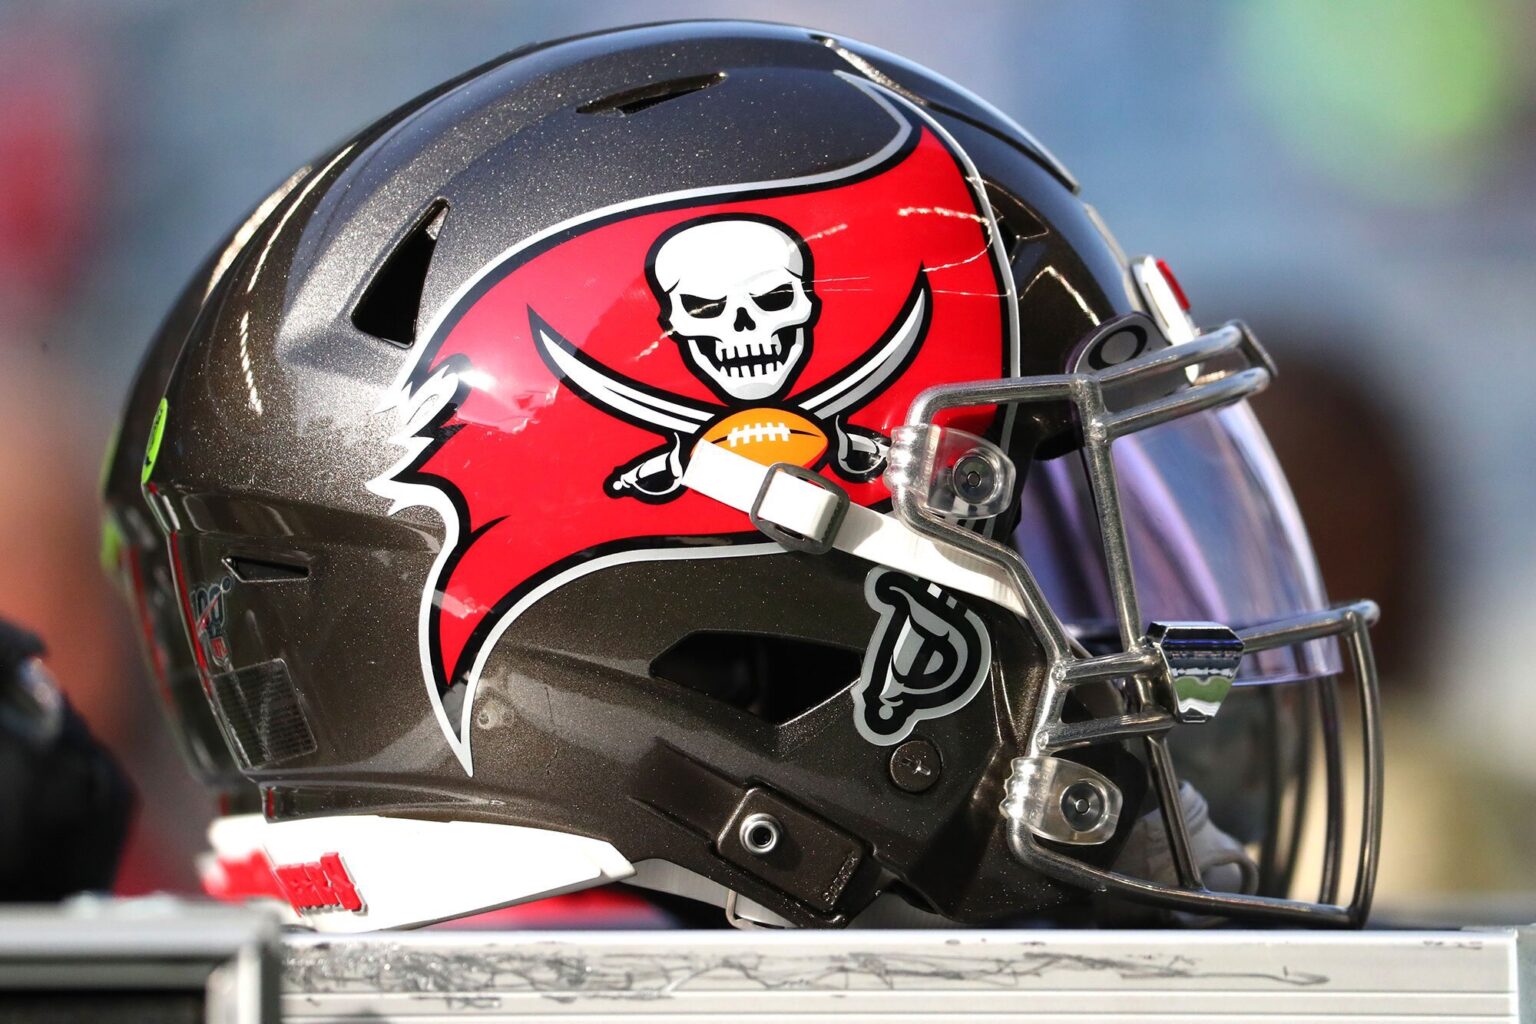 Are behind on the latest Bucs news? Celebrate the Tampa Bay Buccaneers Super Bowl win with these hilarious memes.